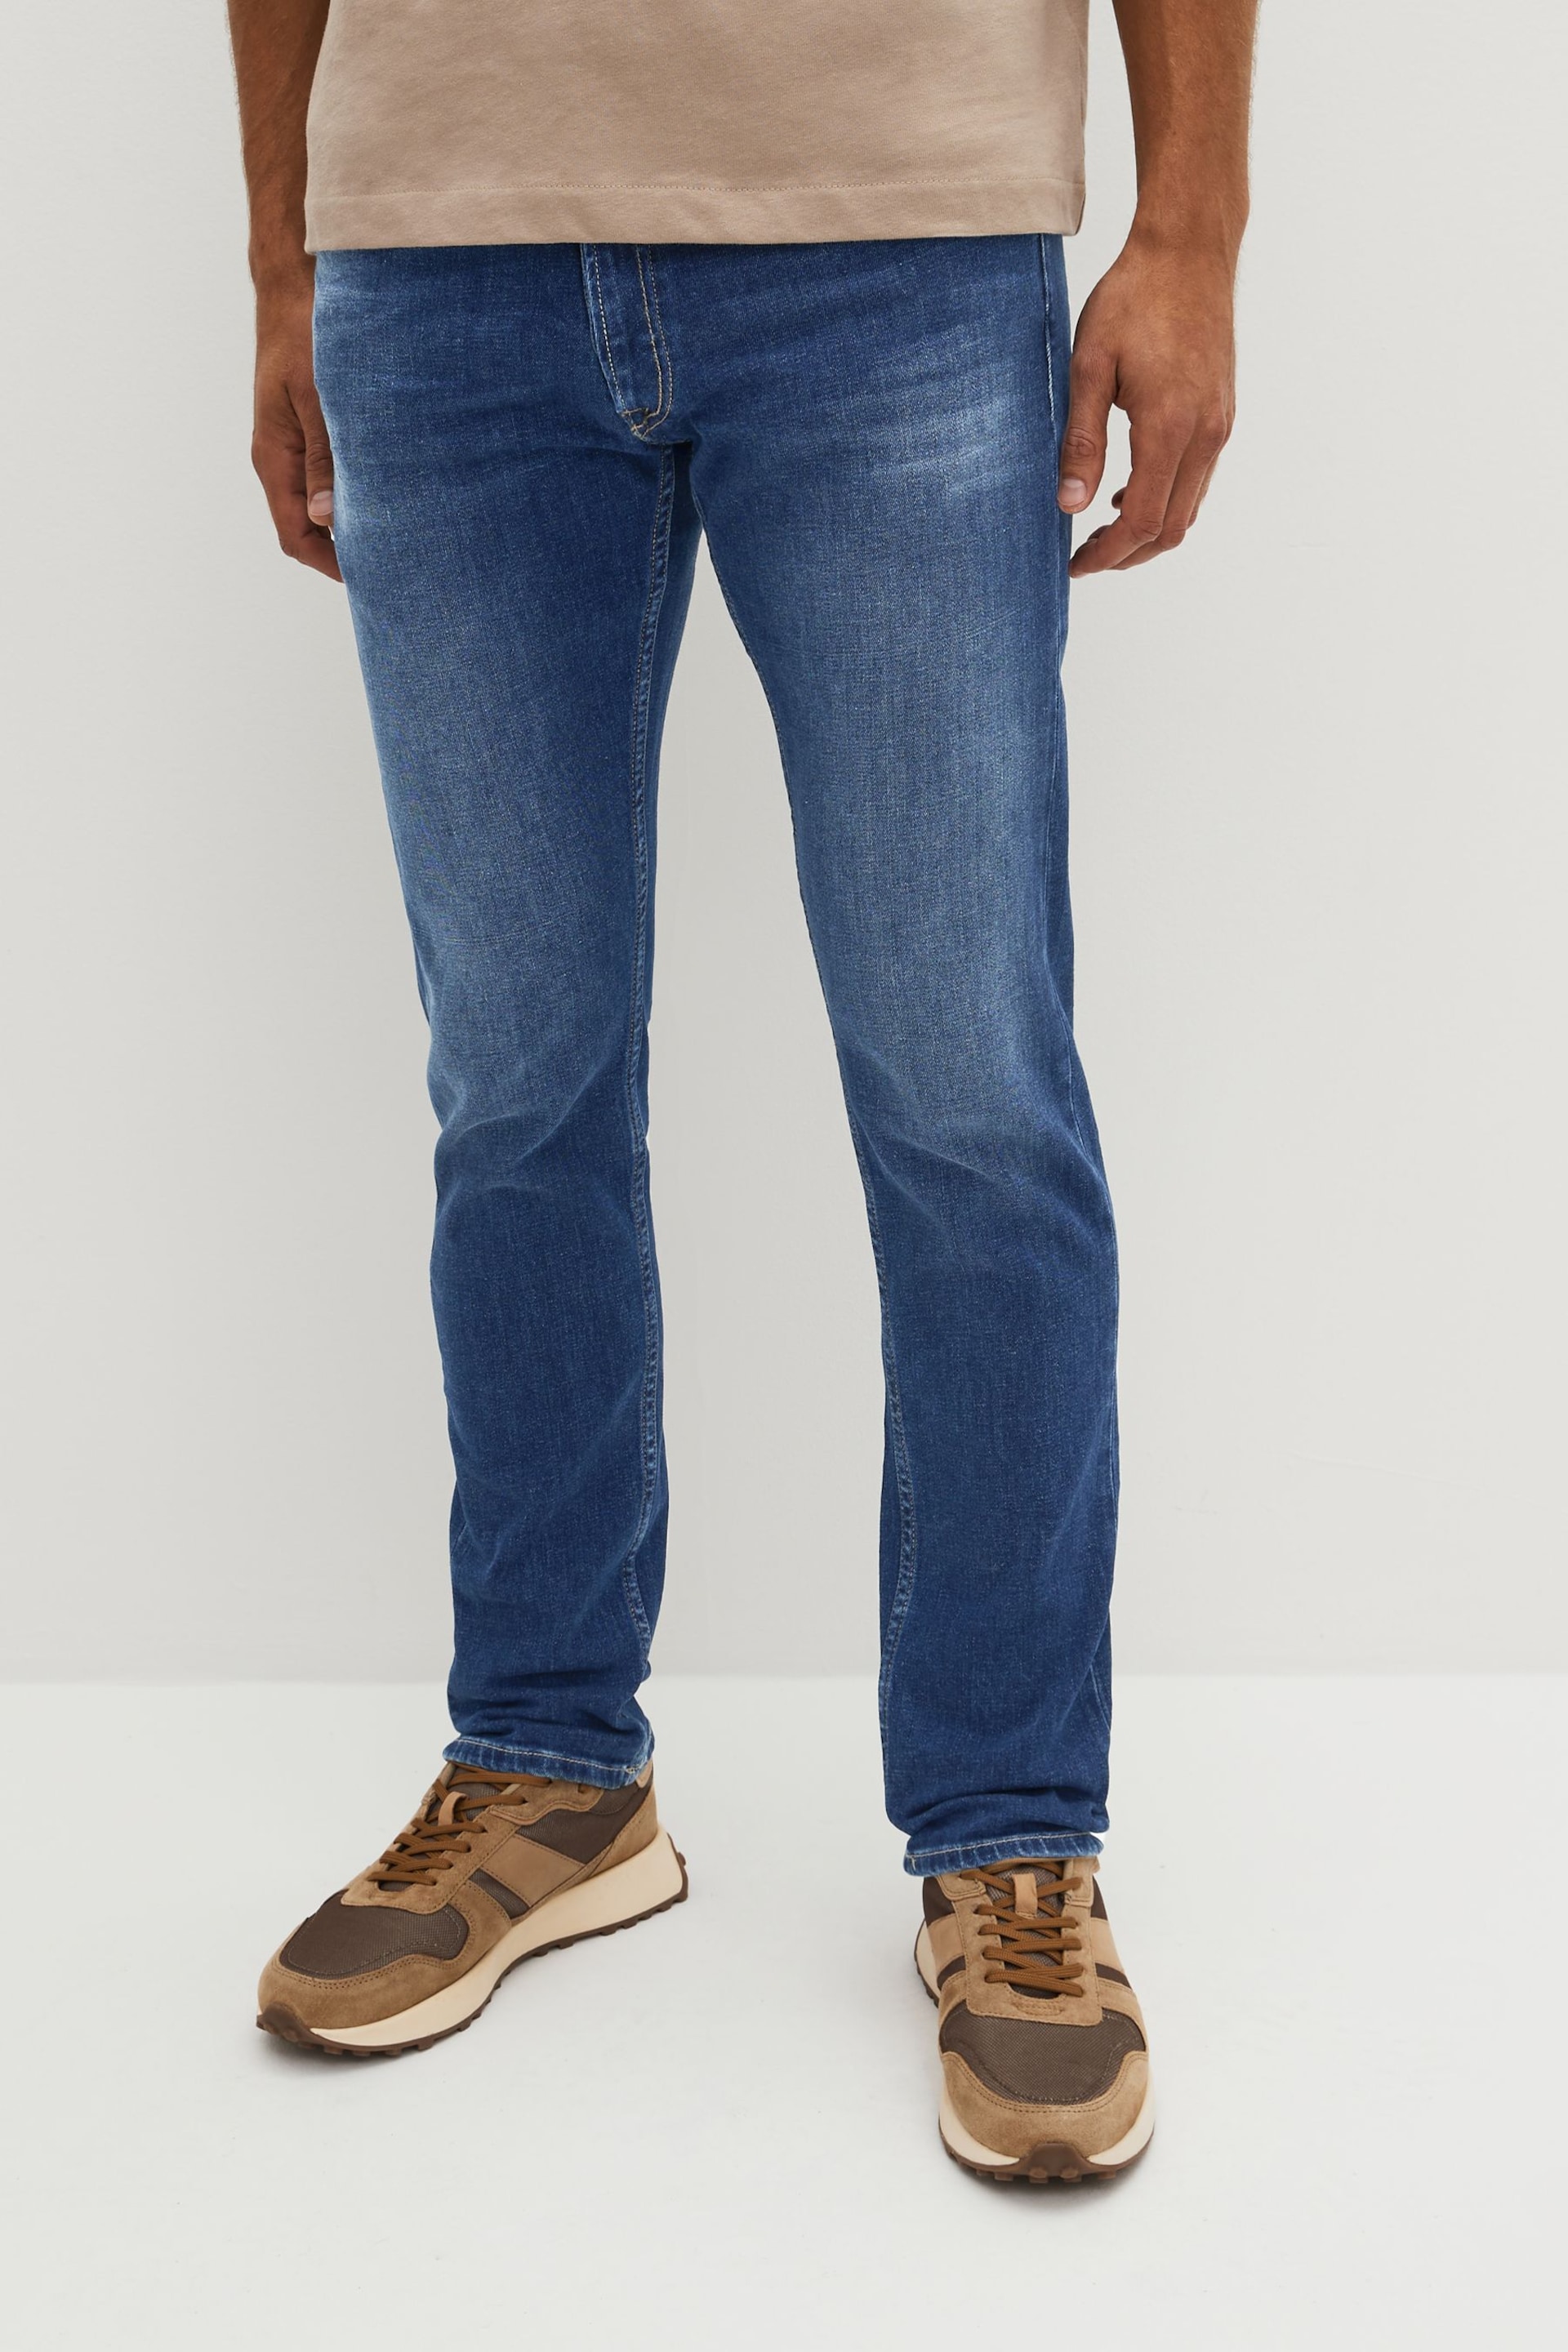 Replay Straight Fit Grover Jeans - Image 1 of 5